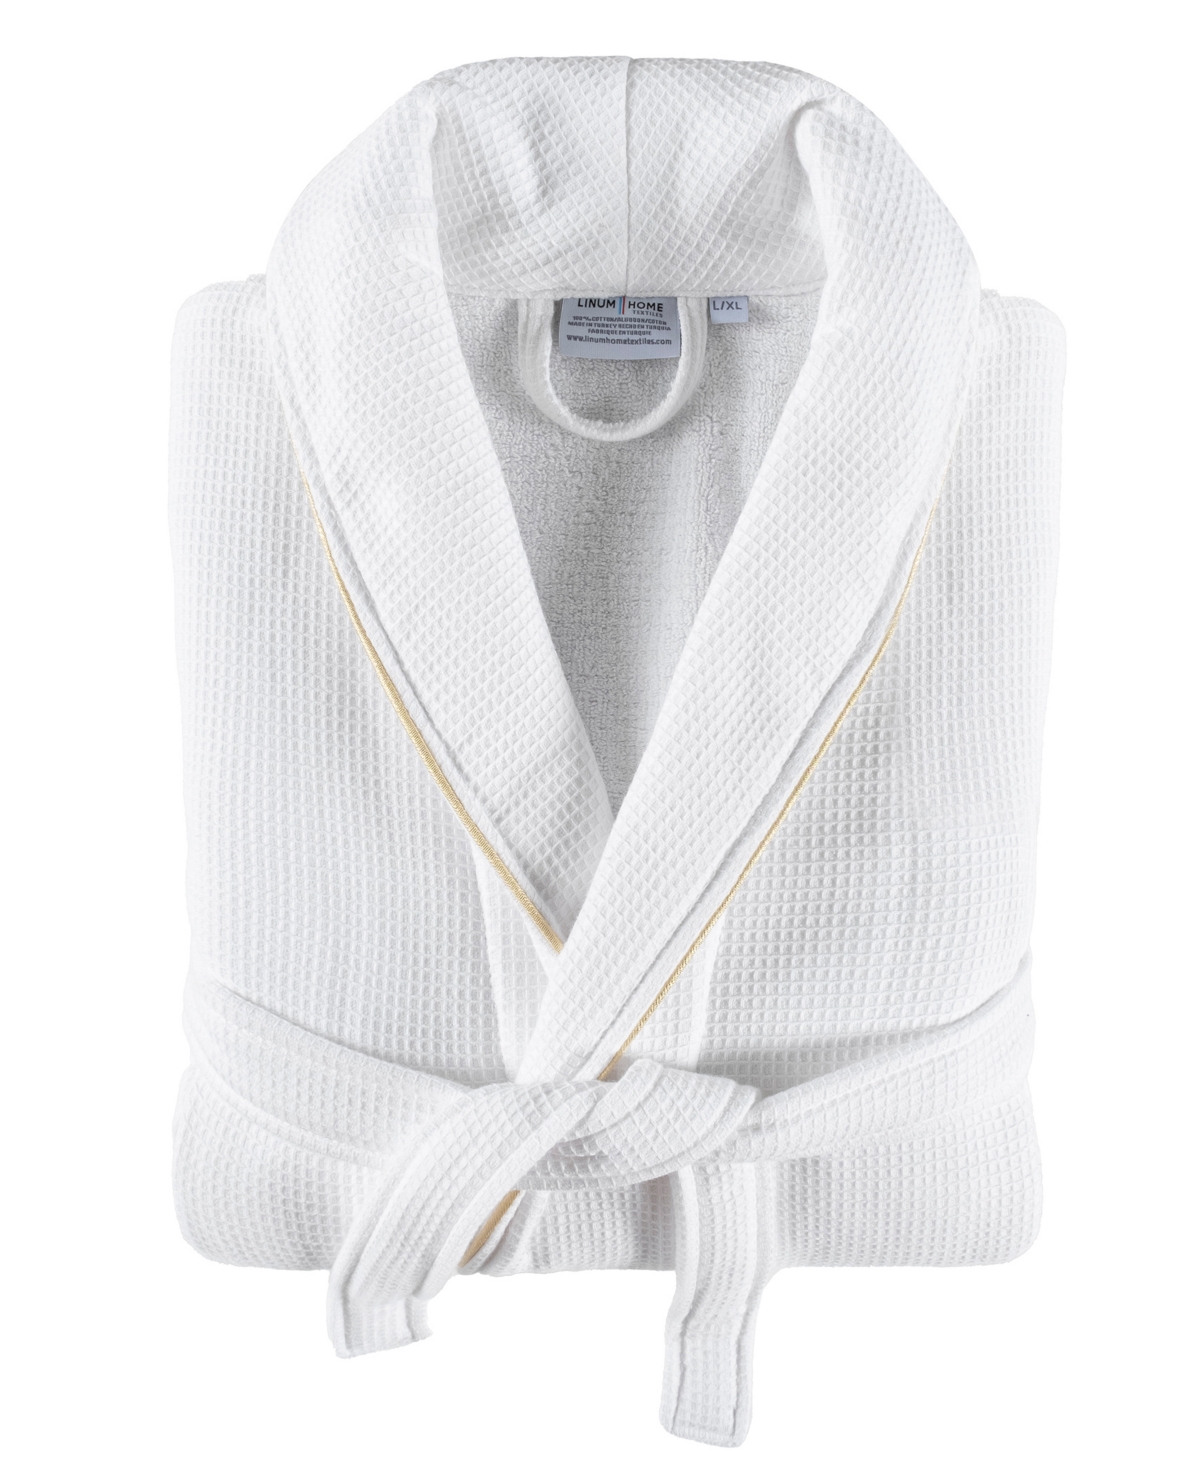 Unisex Waffle Weave Terry 100% Turkish Cotton Bathrobe with Satin Piped Trim - White, Gold